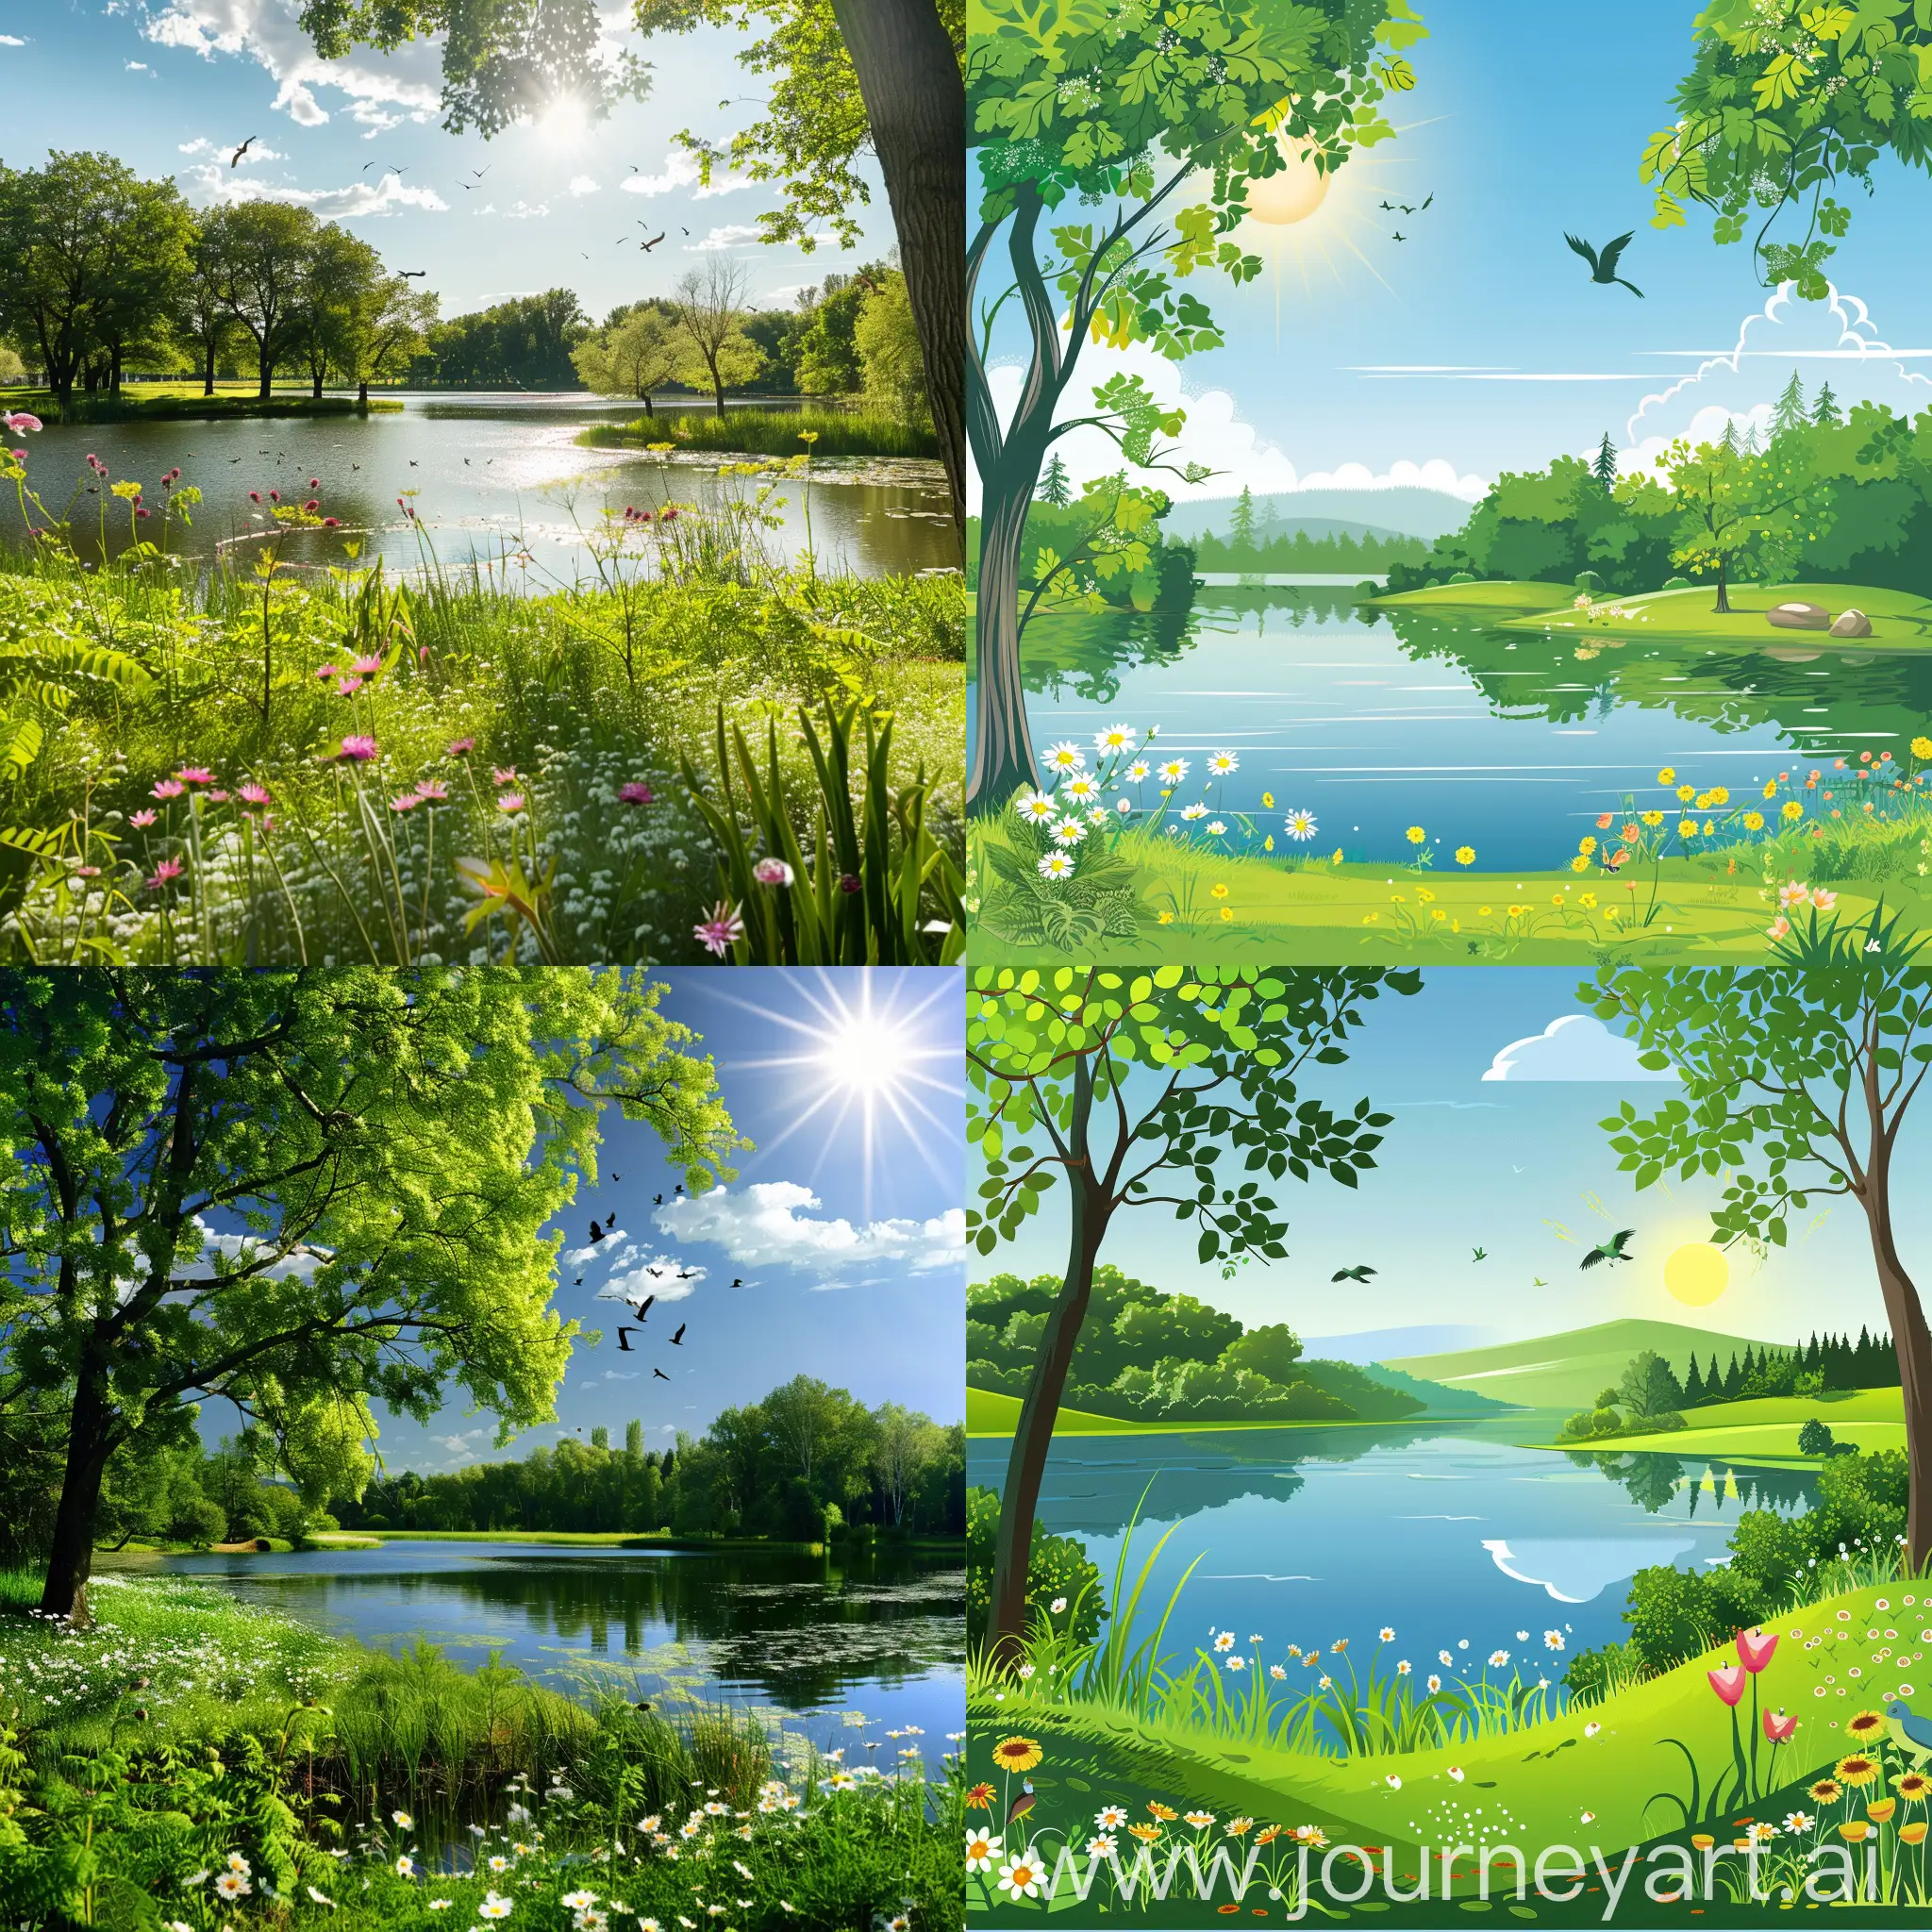 Green landscape, a lake, trees, sunny day, flowers, birds